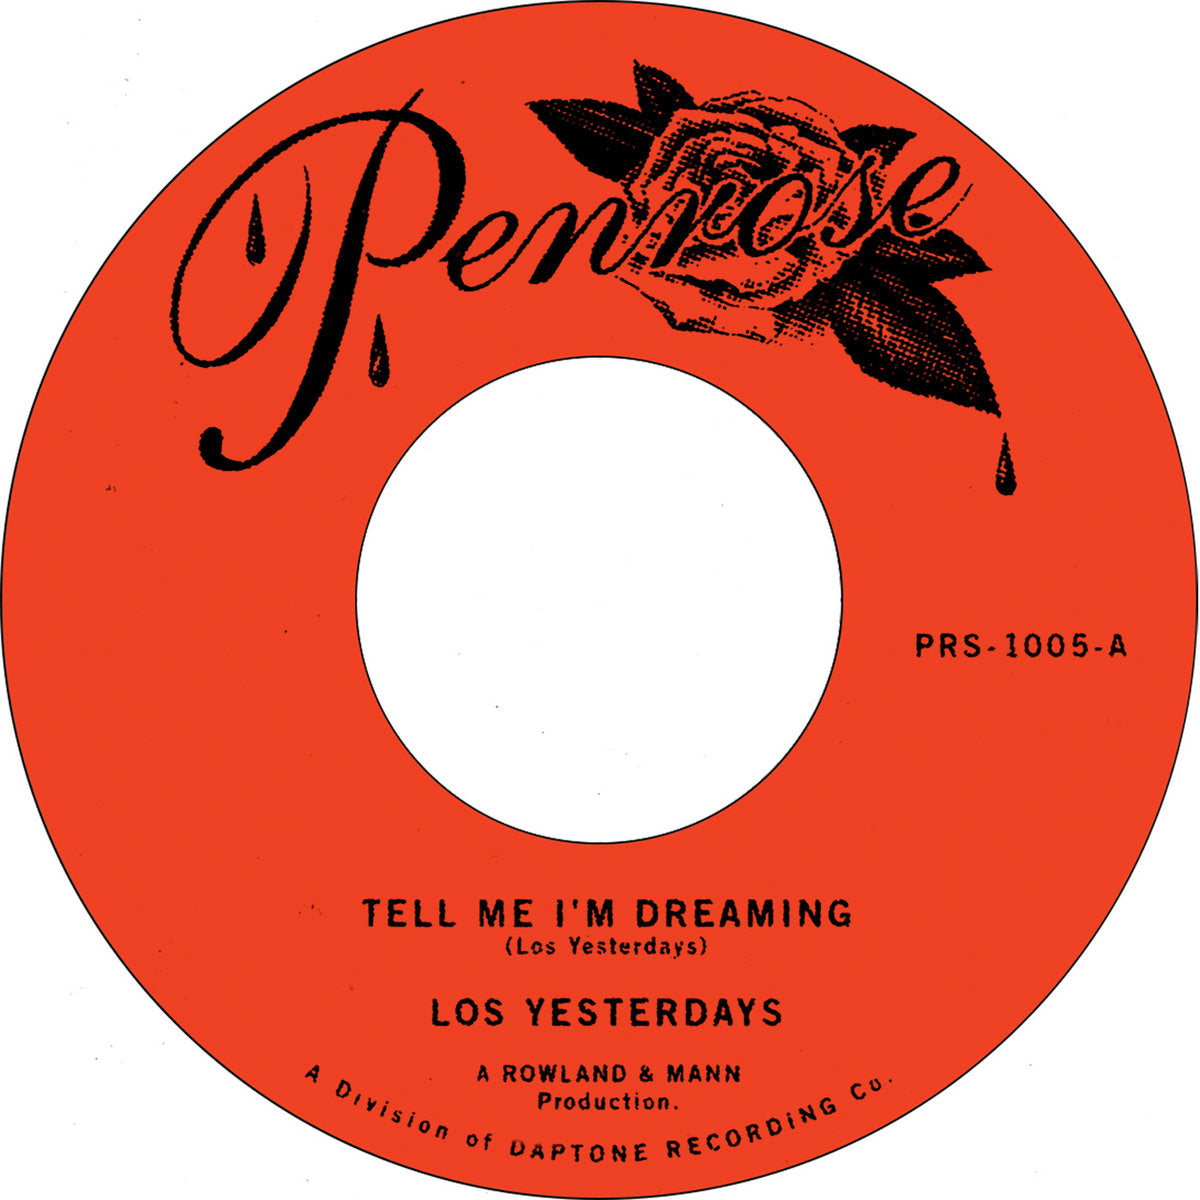 Los Yesterdays - "Tell Me I'm Dreaming" / "Time" 45